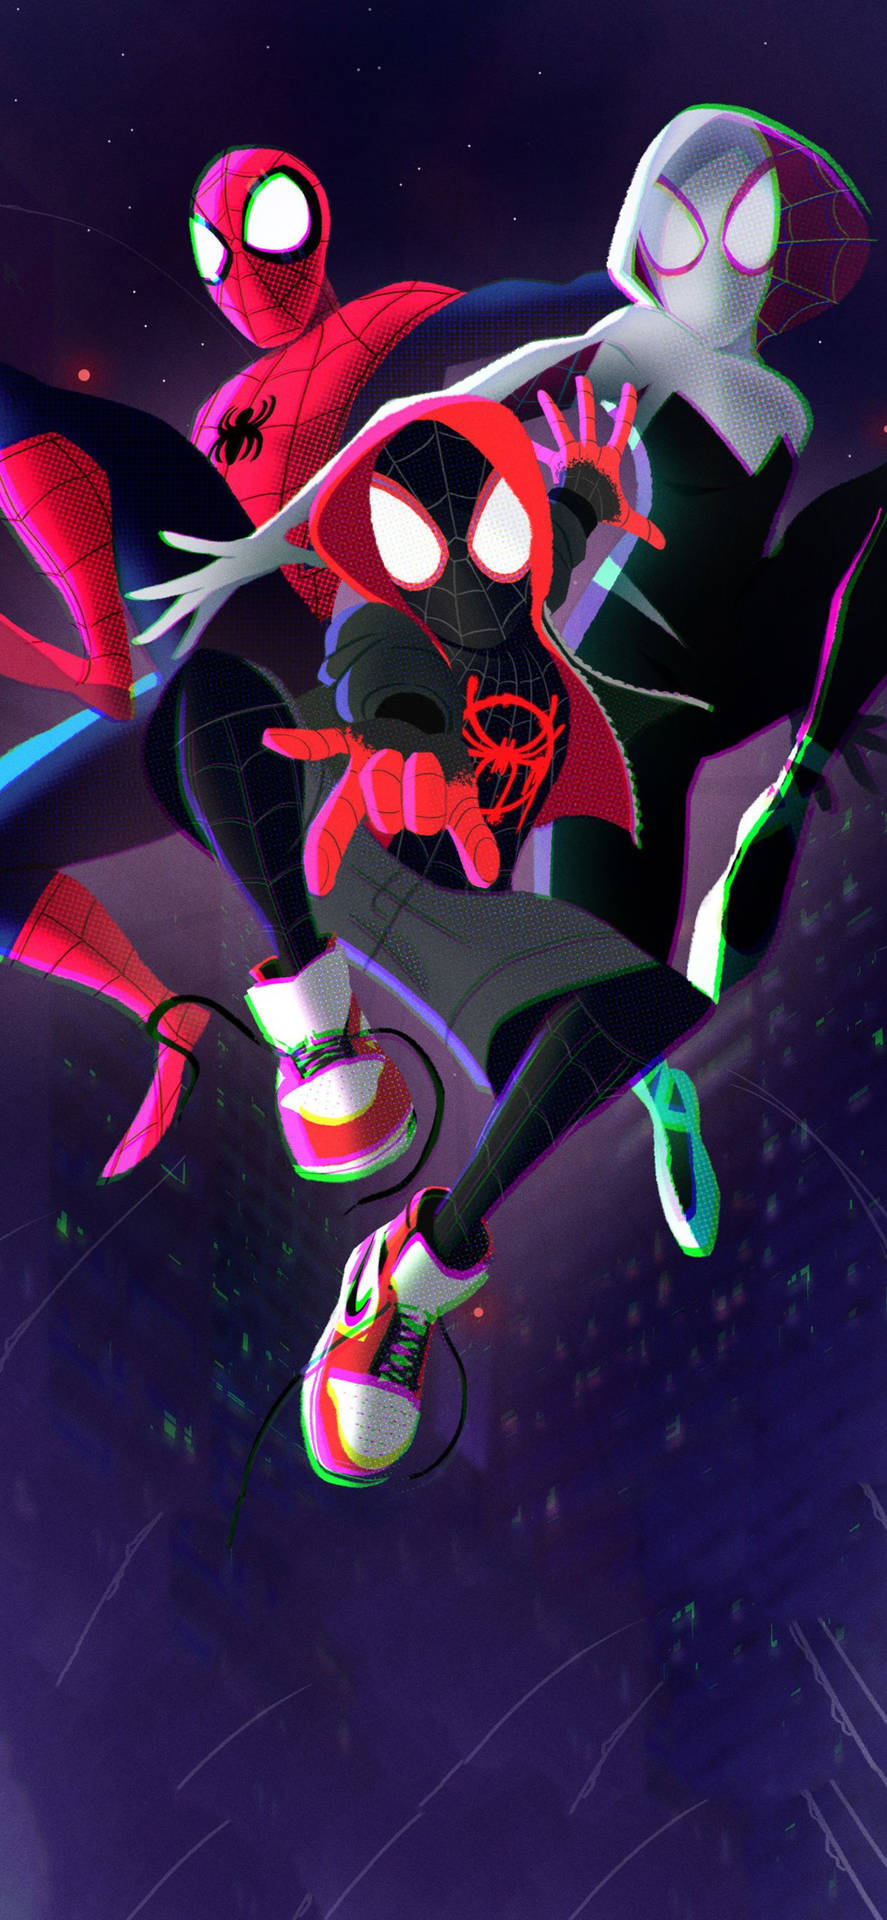 Miles Morales, the star of the action-packed film 